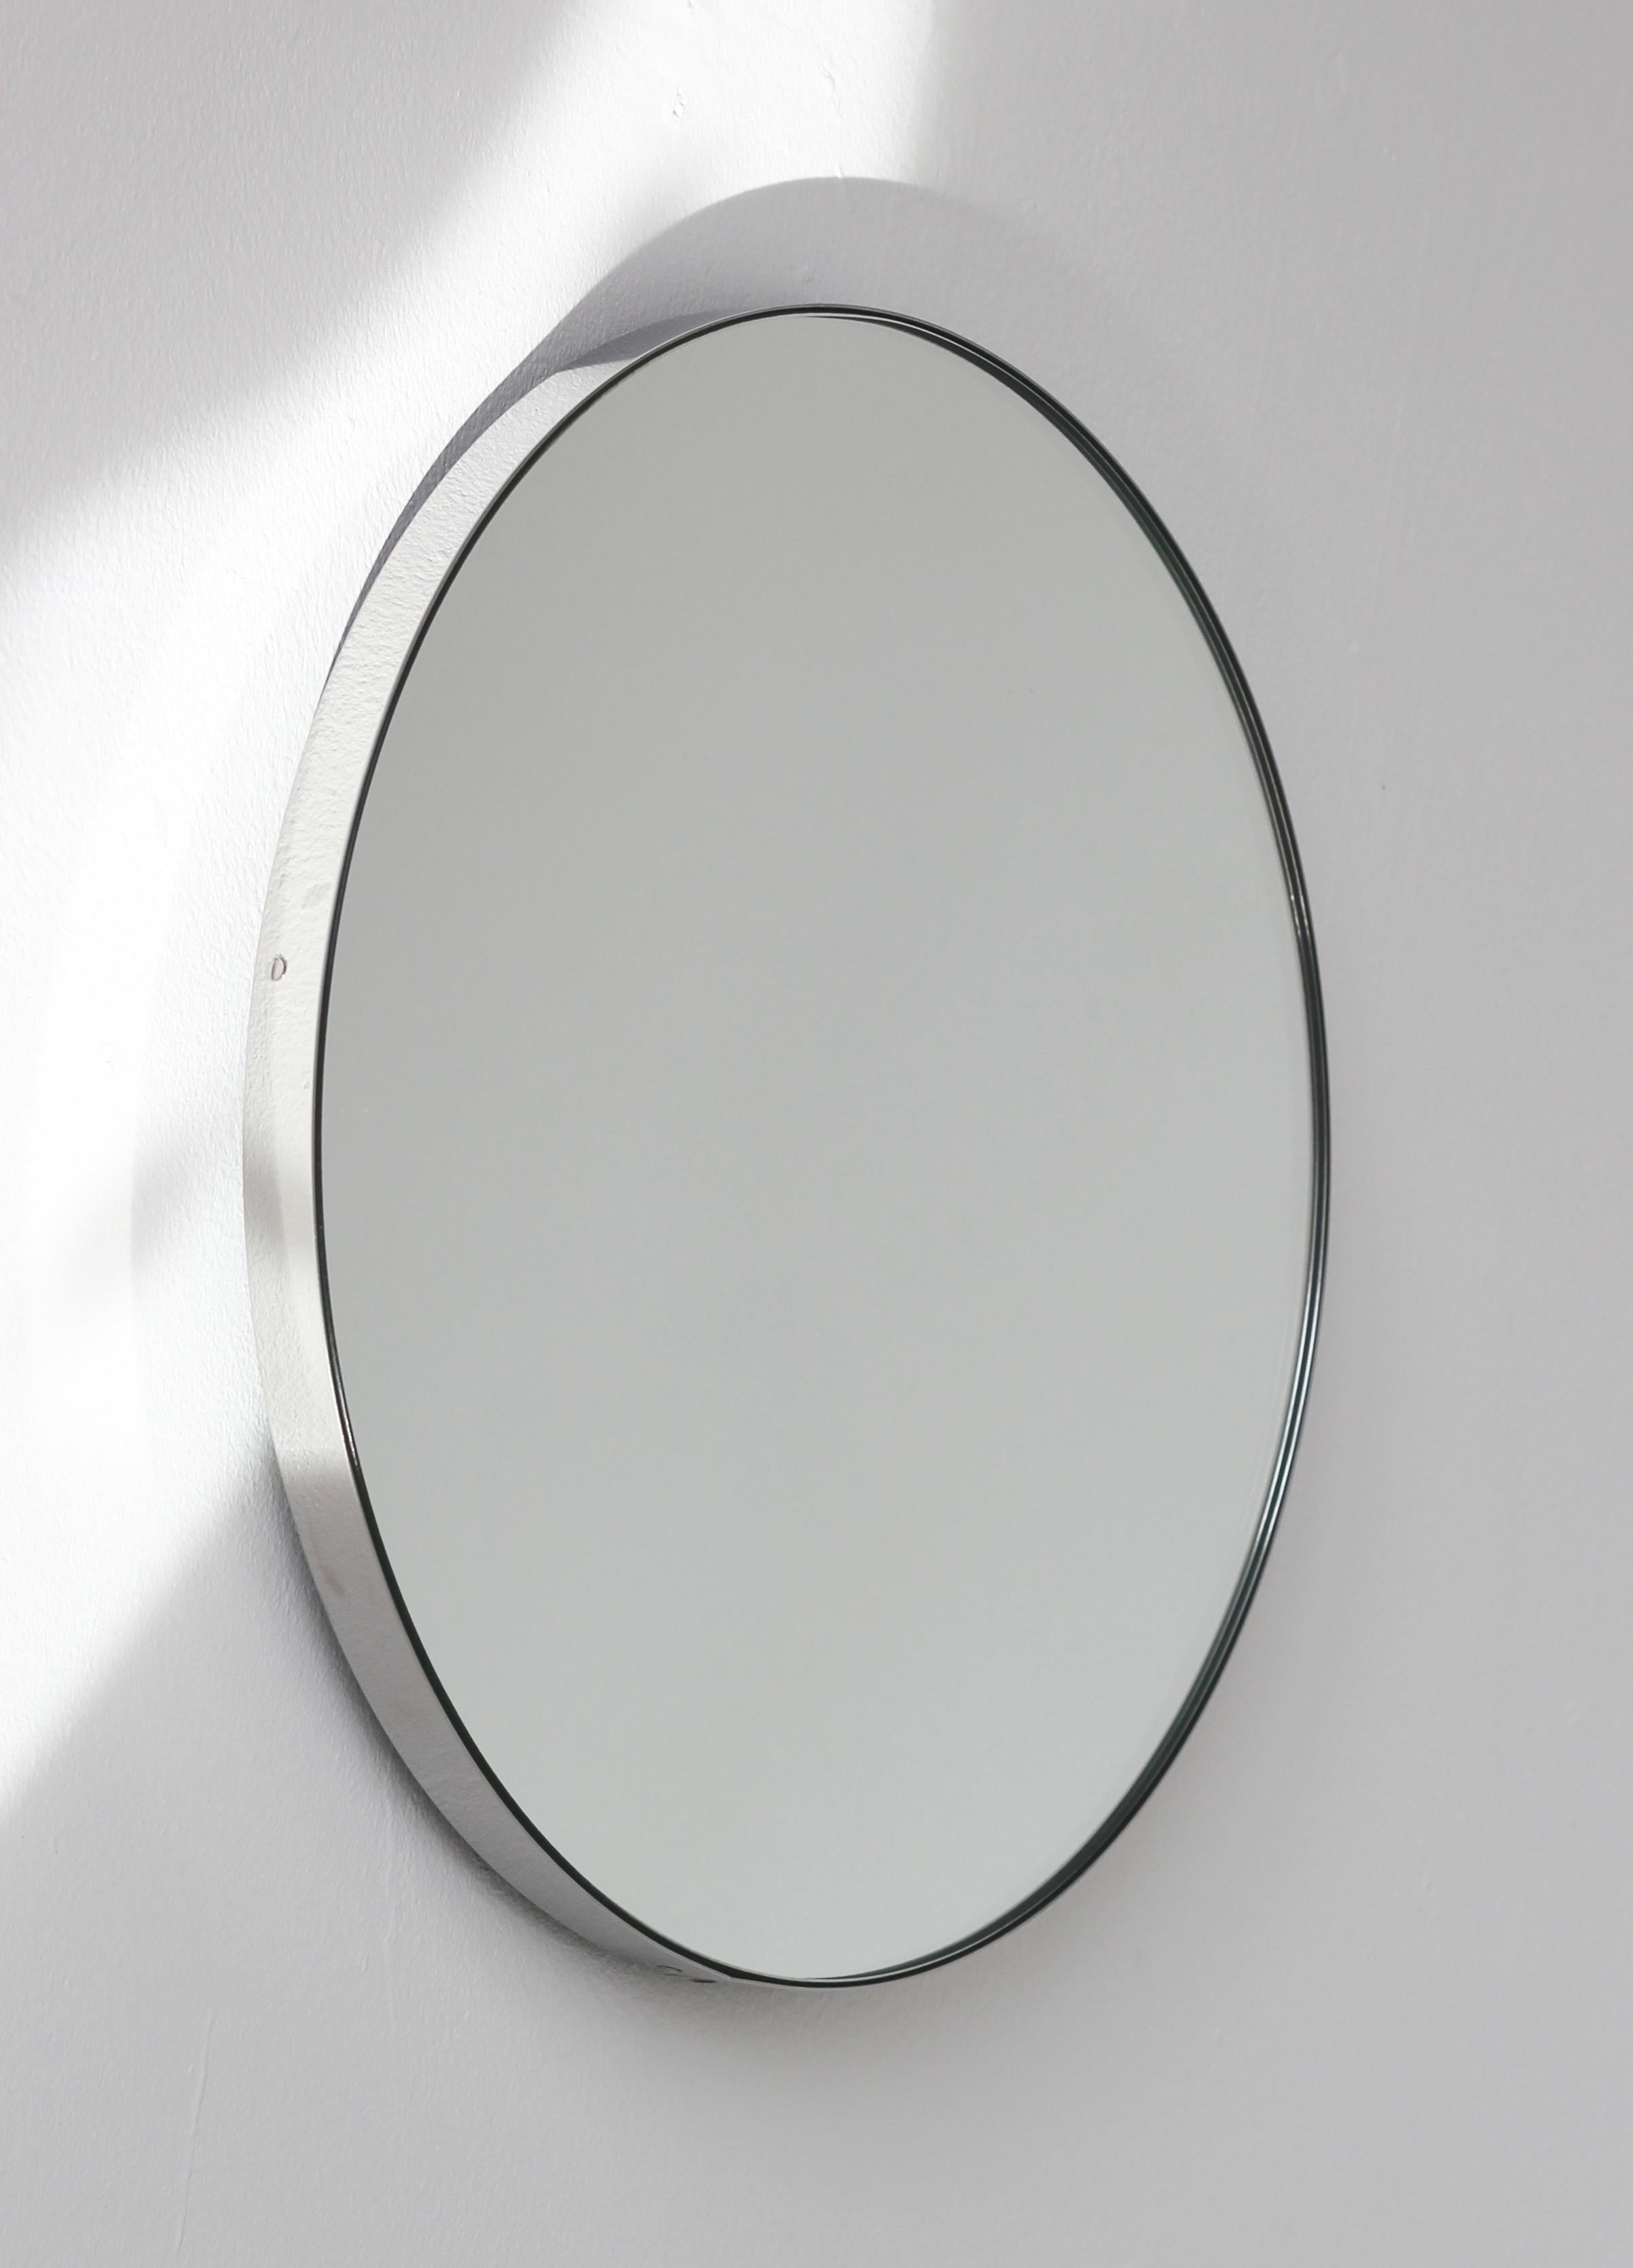 Orbis Round Handcrafted Mirror with Stainless Steel Frame, Large For Sale 1